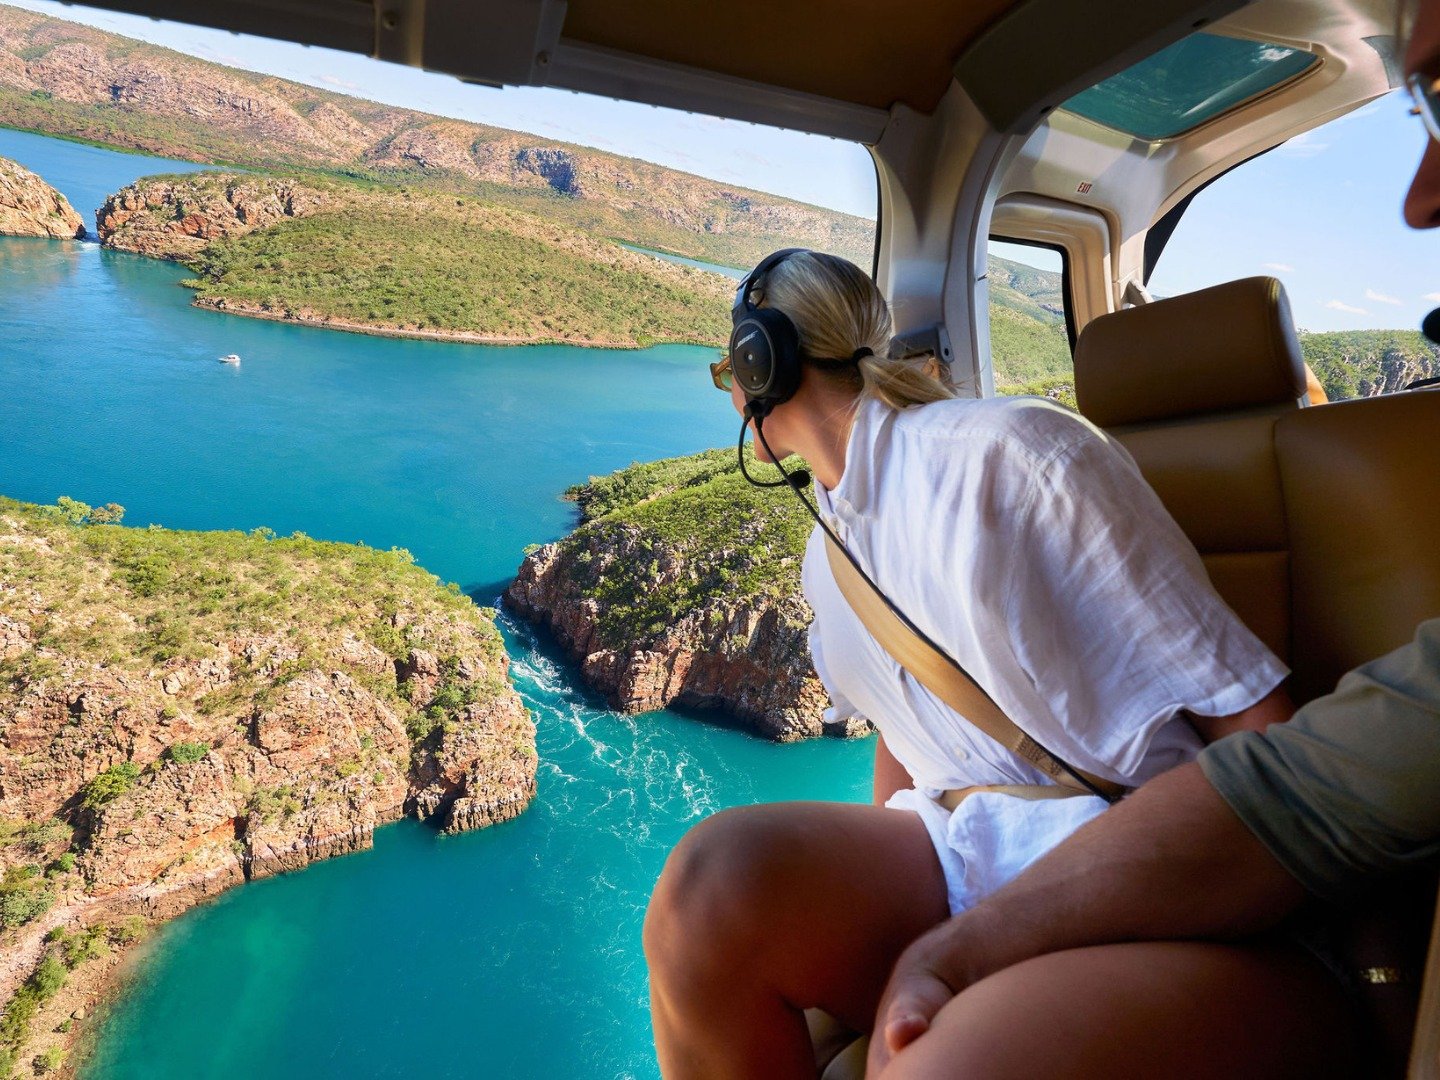 Did you know you can witness the mesmerising Horizontal Falls during your stay at Mount Hart? 🌊

Book our Horizontal Falls &amp; Buccaneer Archipelago scenic helicopter flight or our 1 day Horizontal Falls Adventure for an unforgettable experience. 